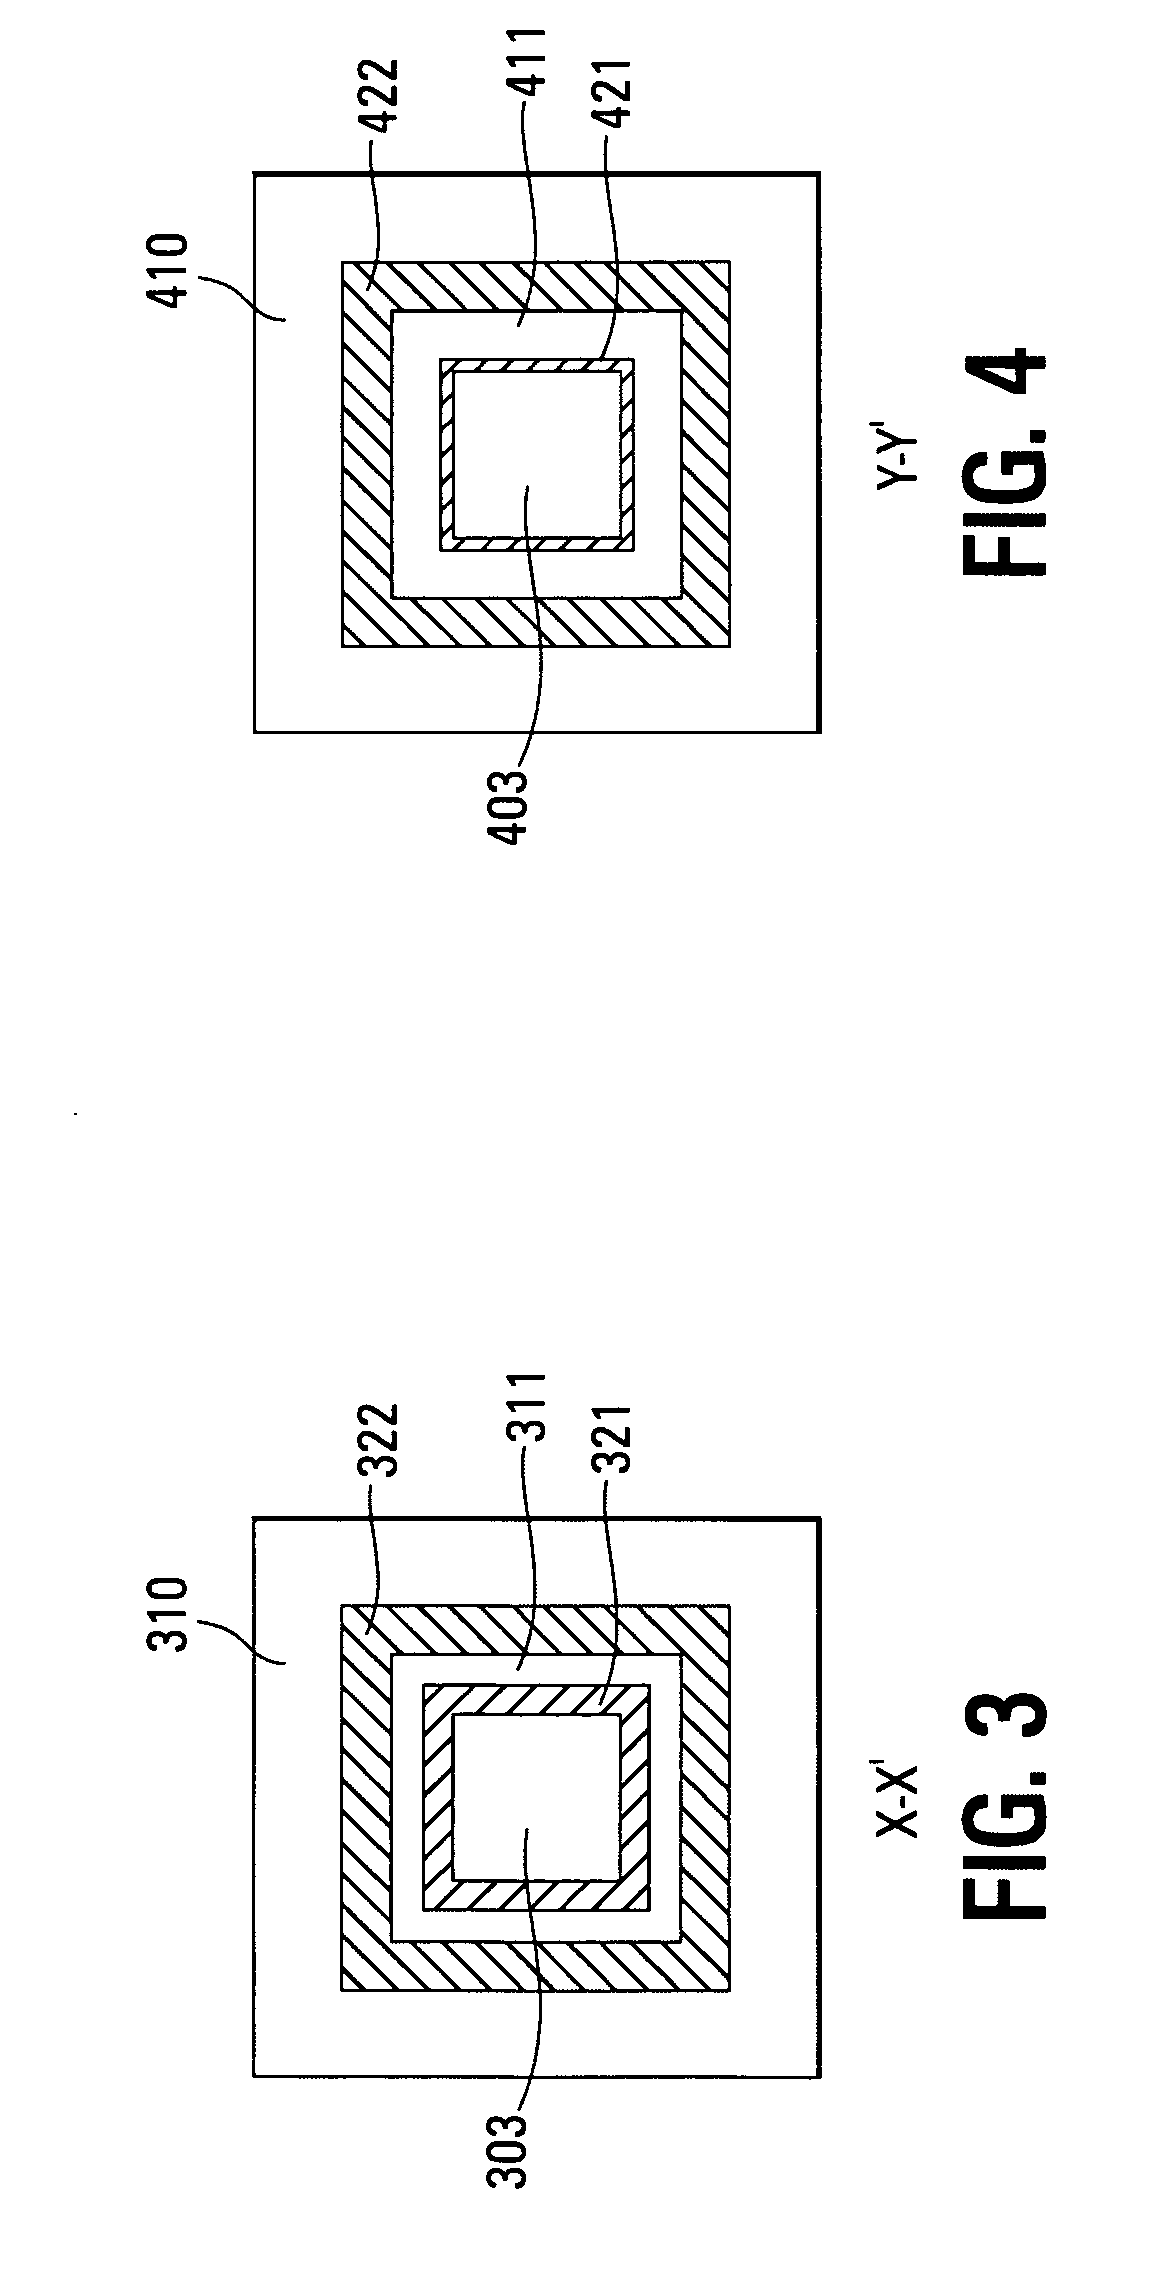 Integrated surround gate multifunctional memory device